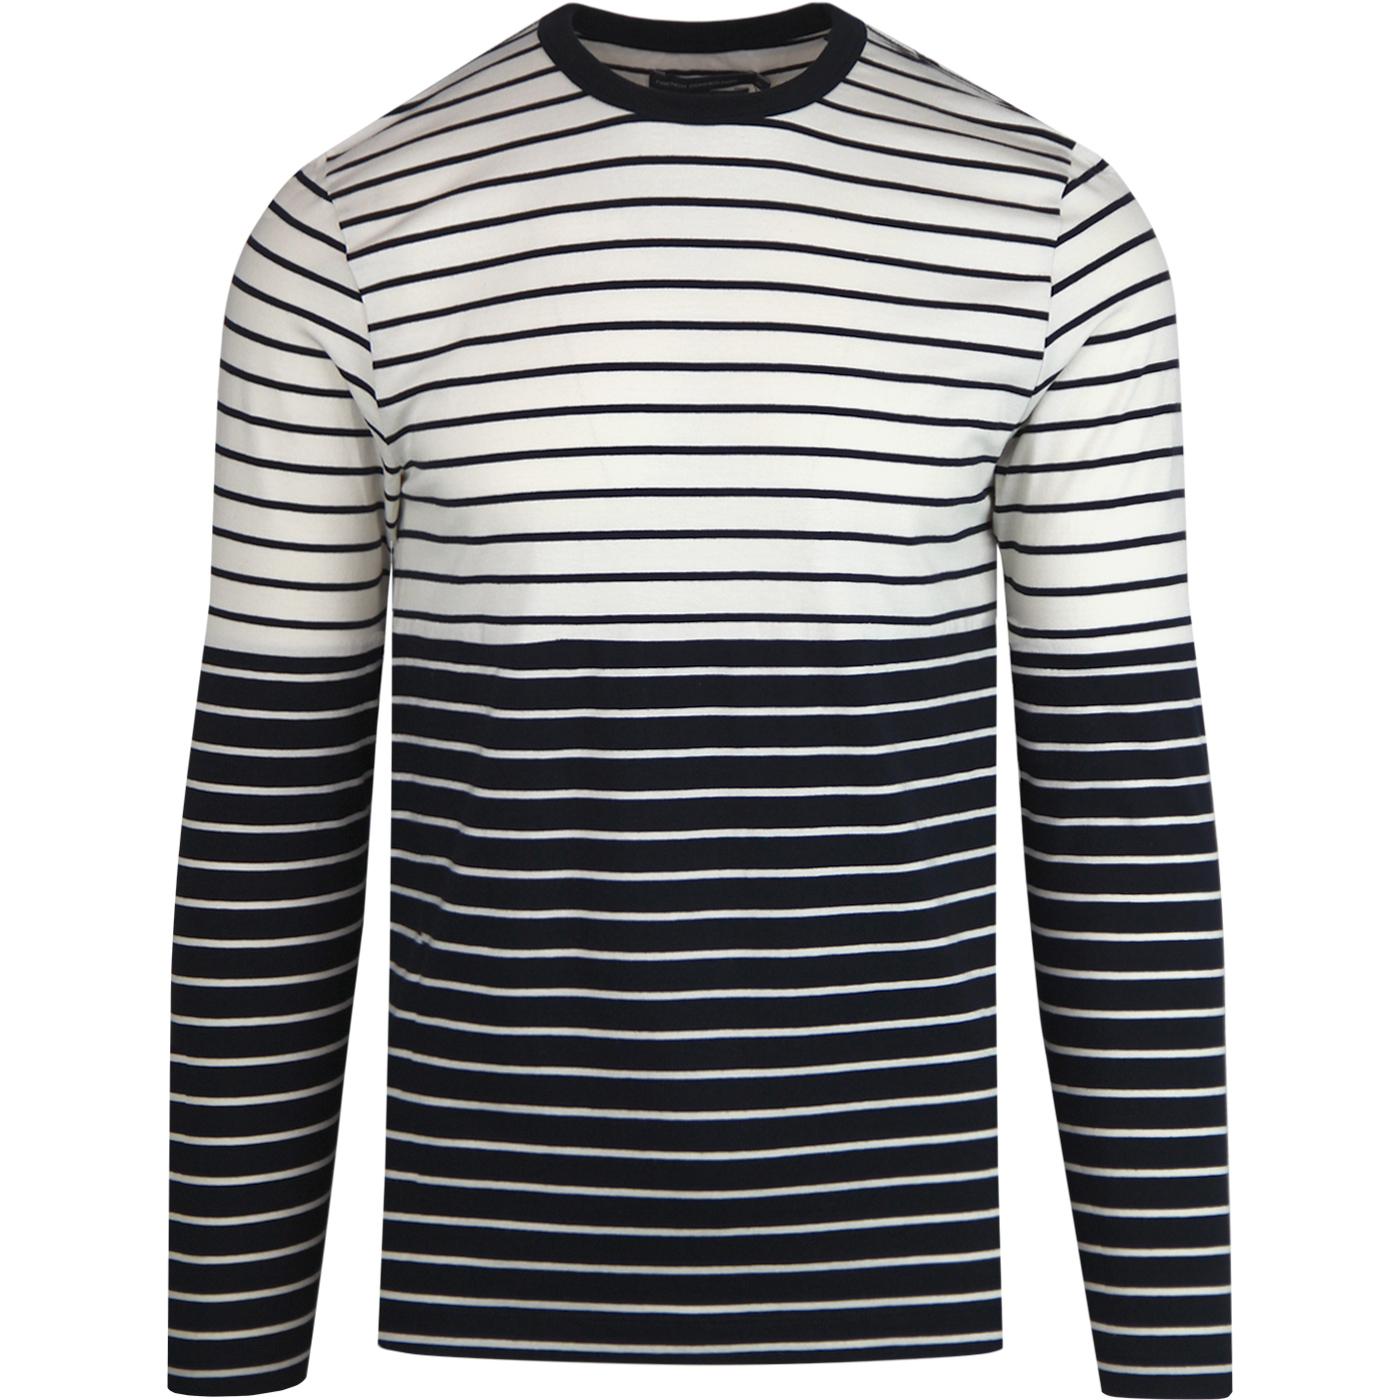 FRENCH CONNECTION Retro Stripe Long Sleeve T-shirt